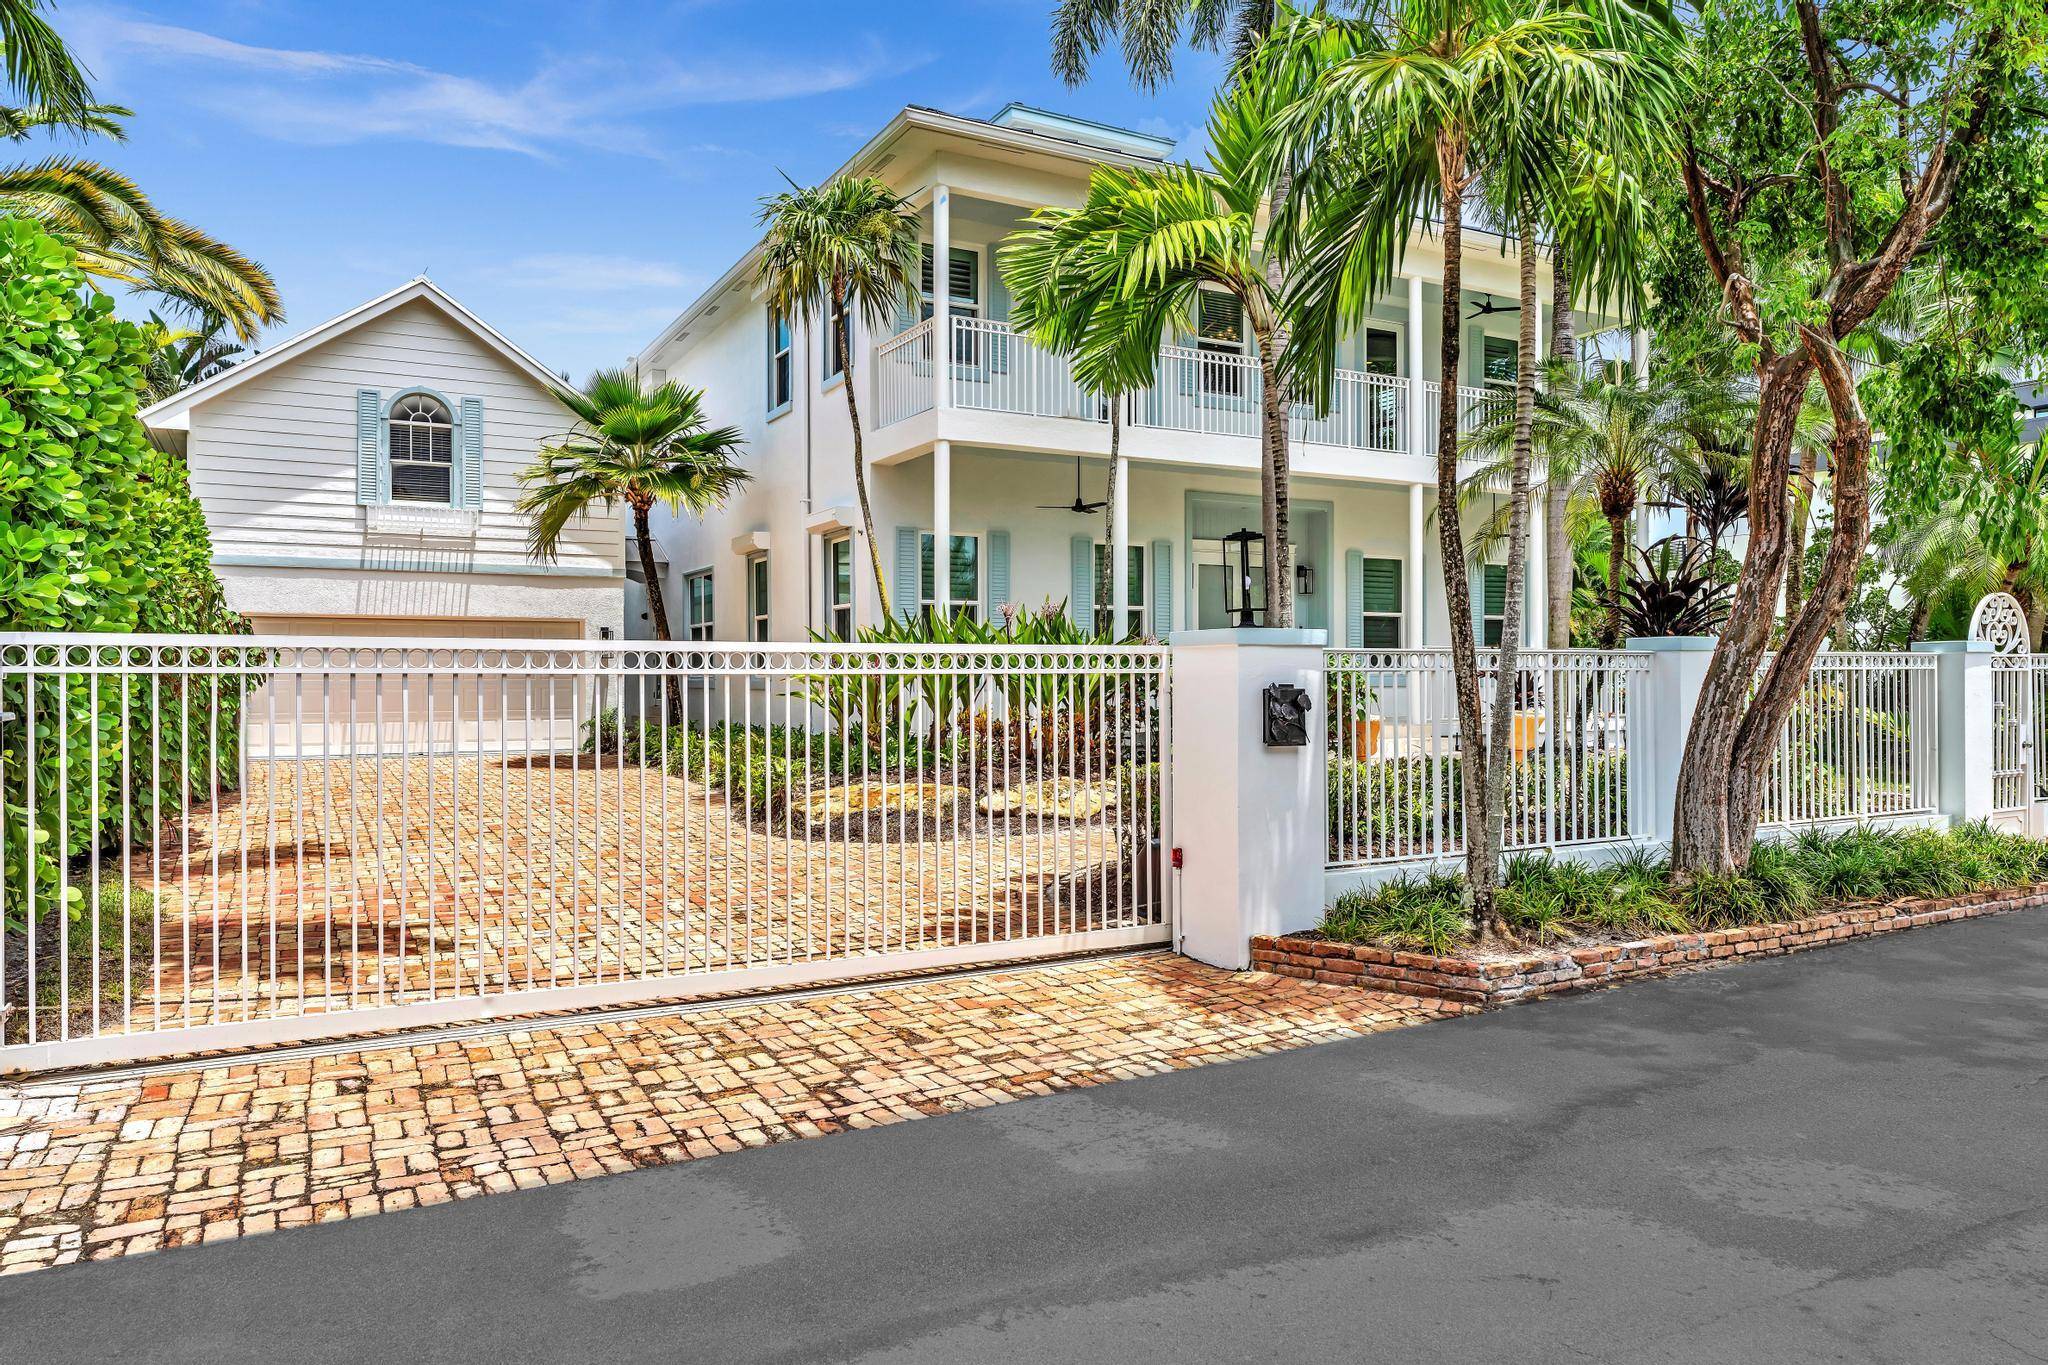 This gorgeous updated Key West style 5bed 5bath, 2 story, 75 ft waterfront home with swimming pool on Coconut Isle is now available for rent.